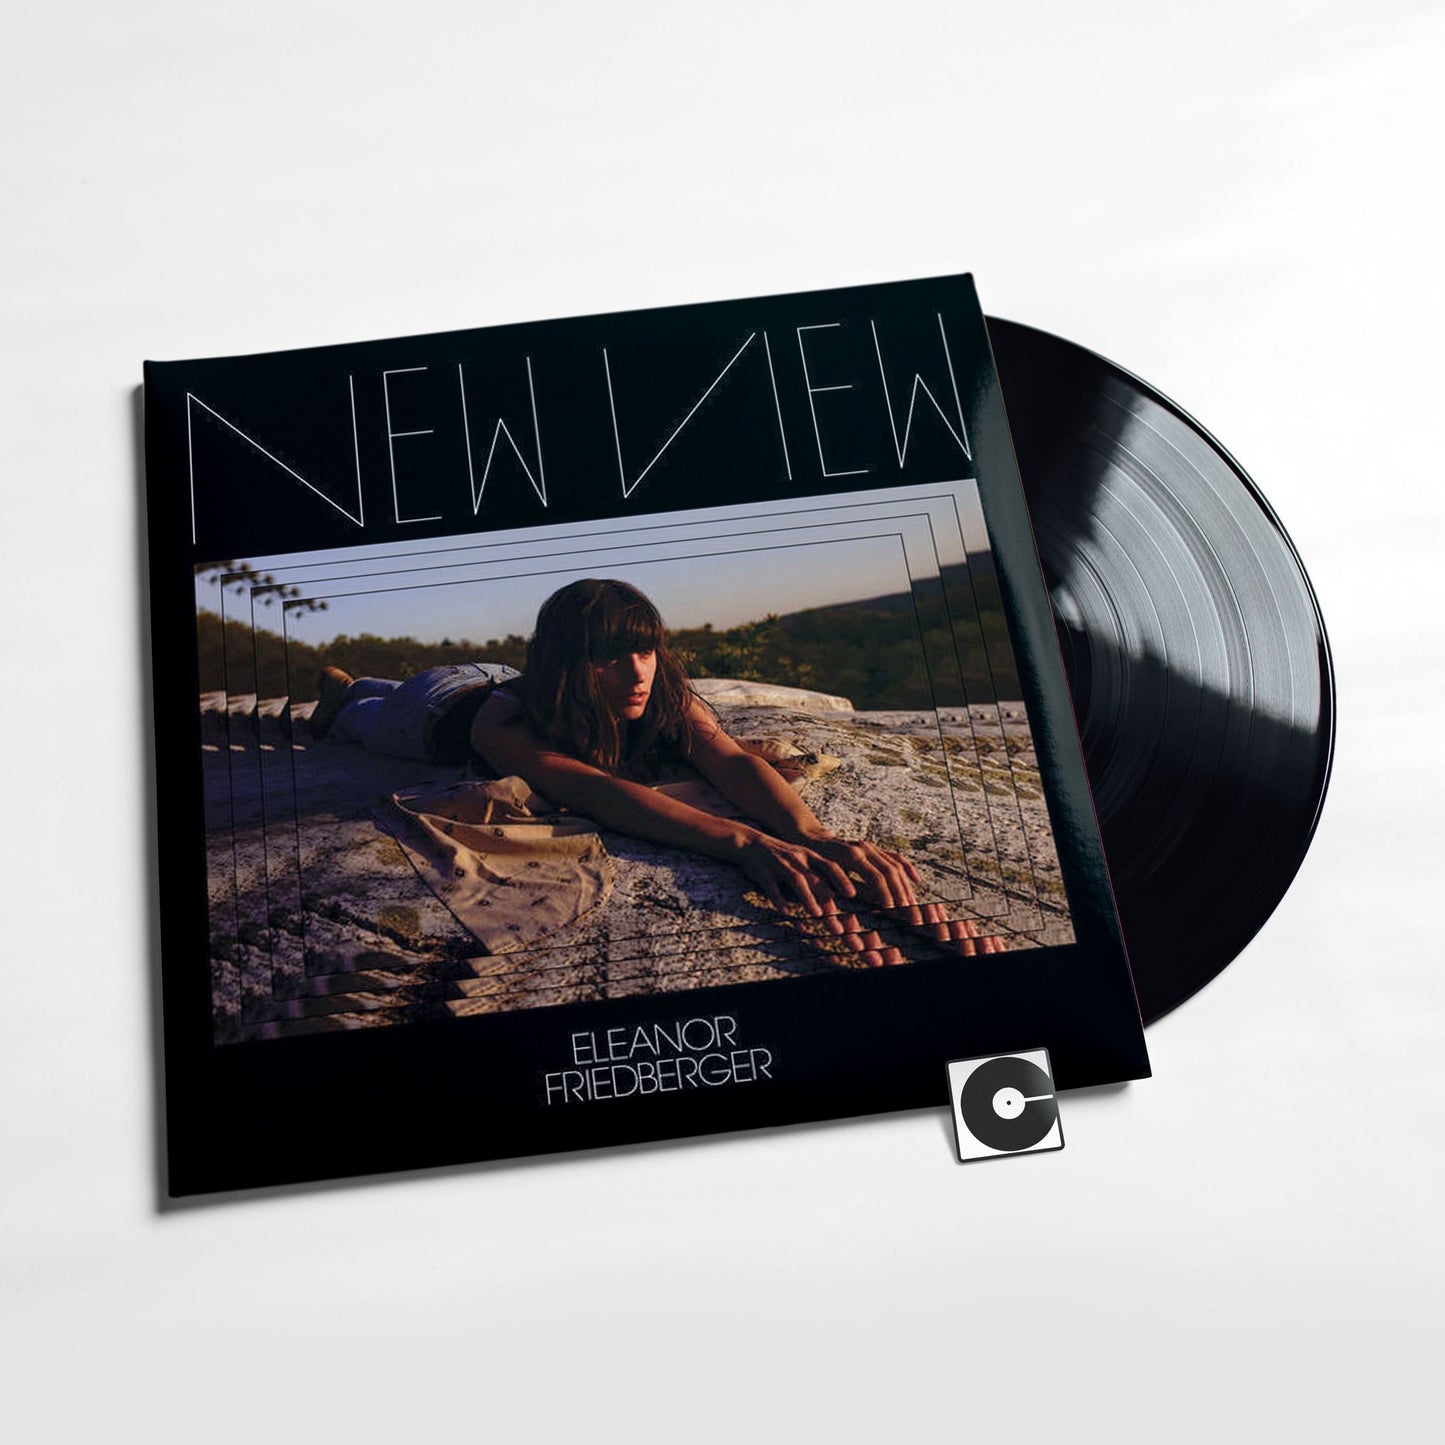 Eleanor Friedberger - "New View"